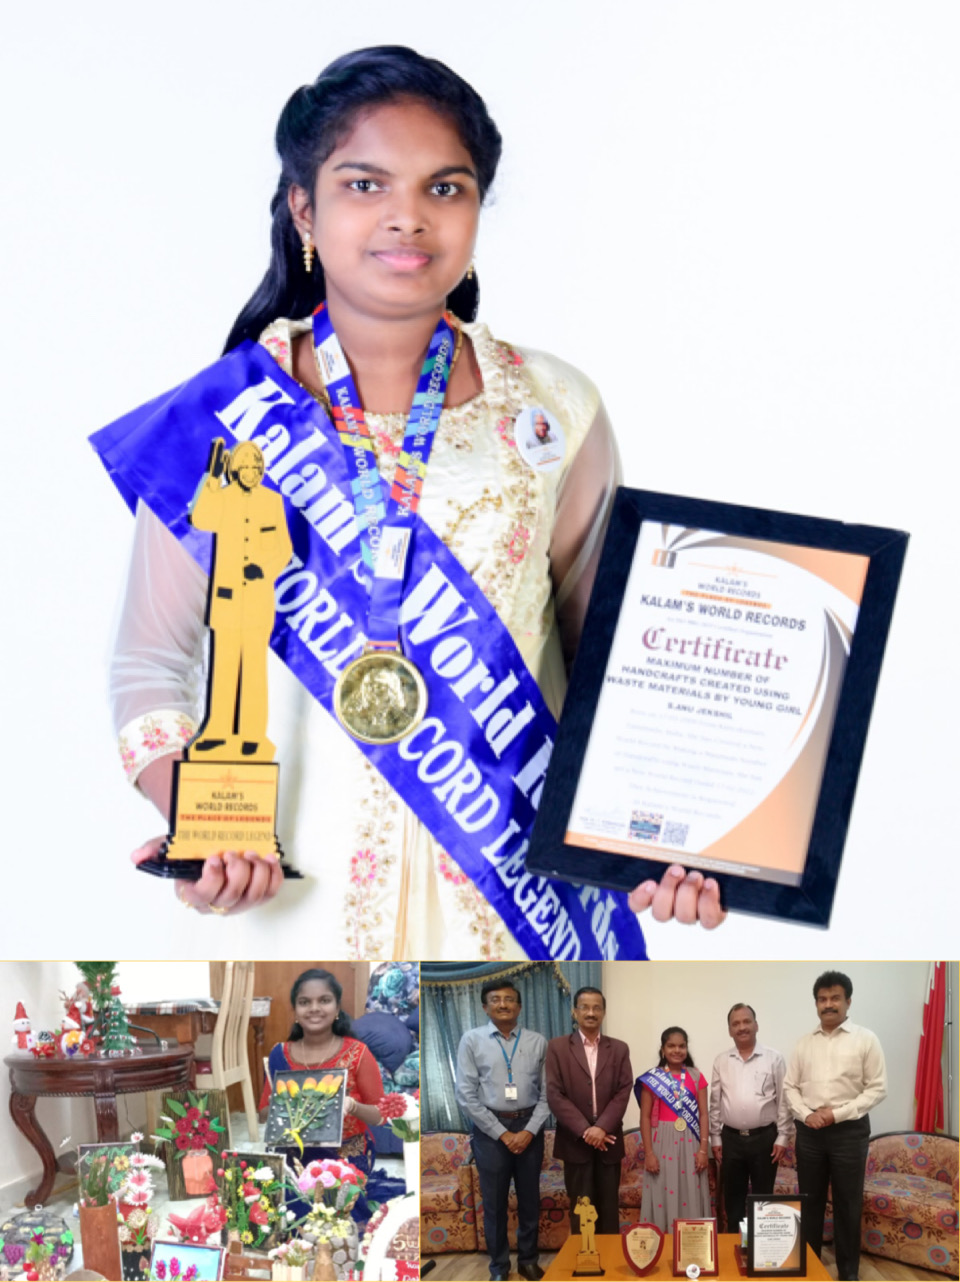 ISB Student Enters Kalam’s World Records